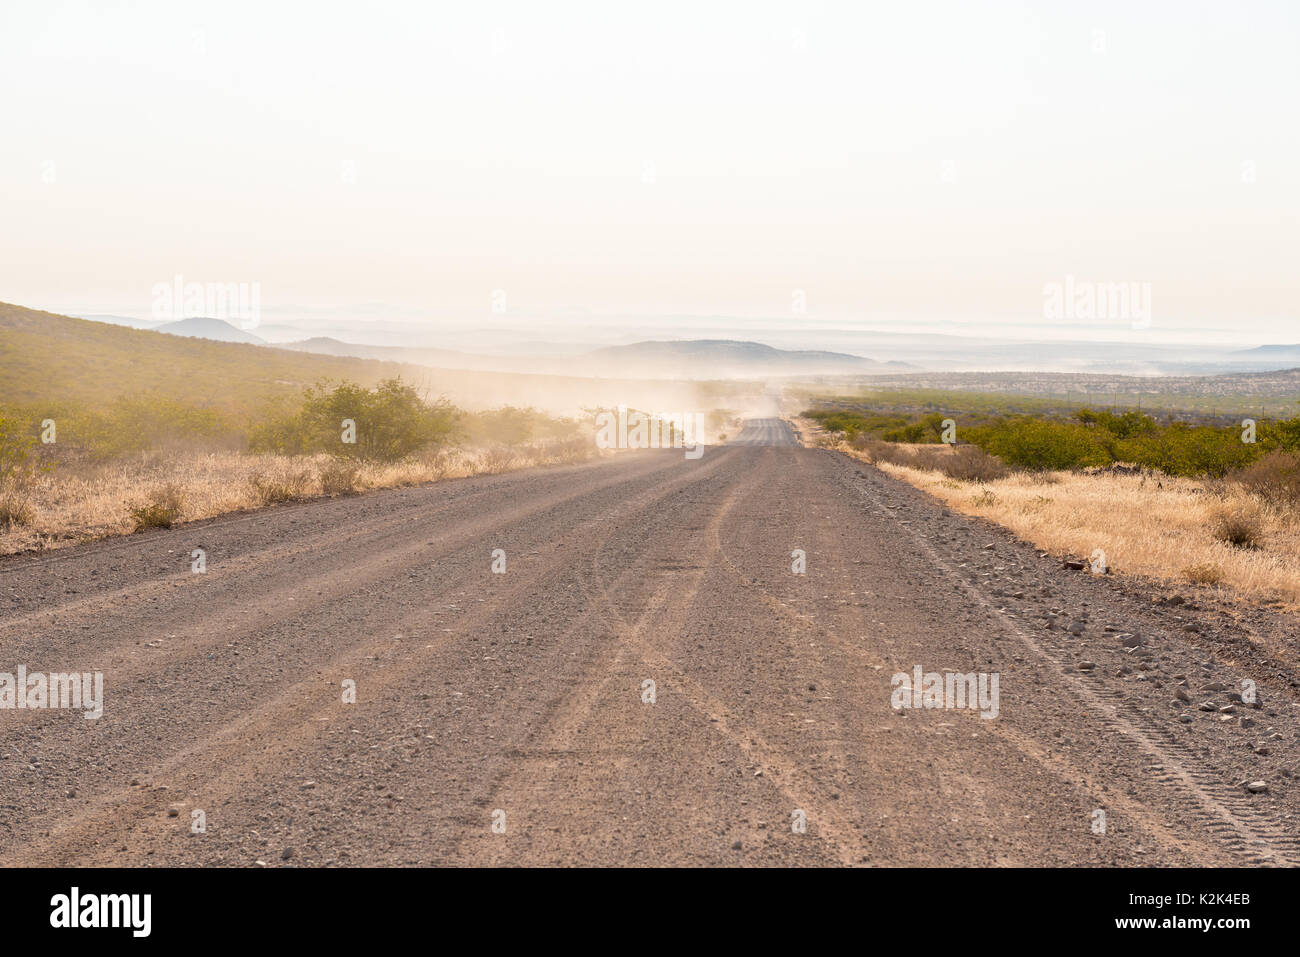 Early morning view of the C40-road, between Kamanjab and Palmwag, in the Kunene Region of Namibia Stock Photo